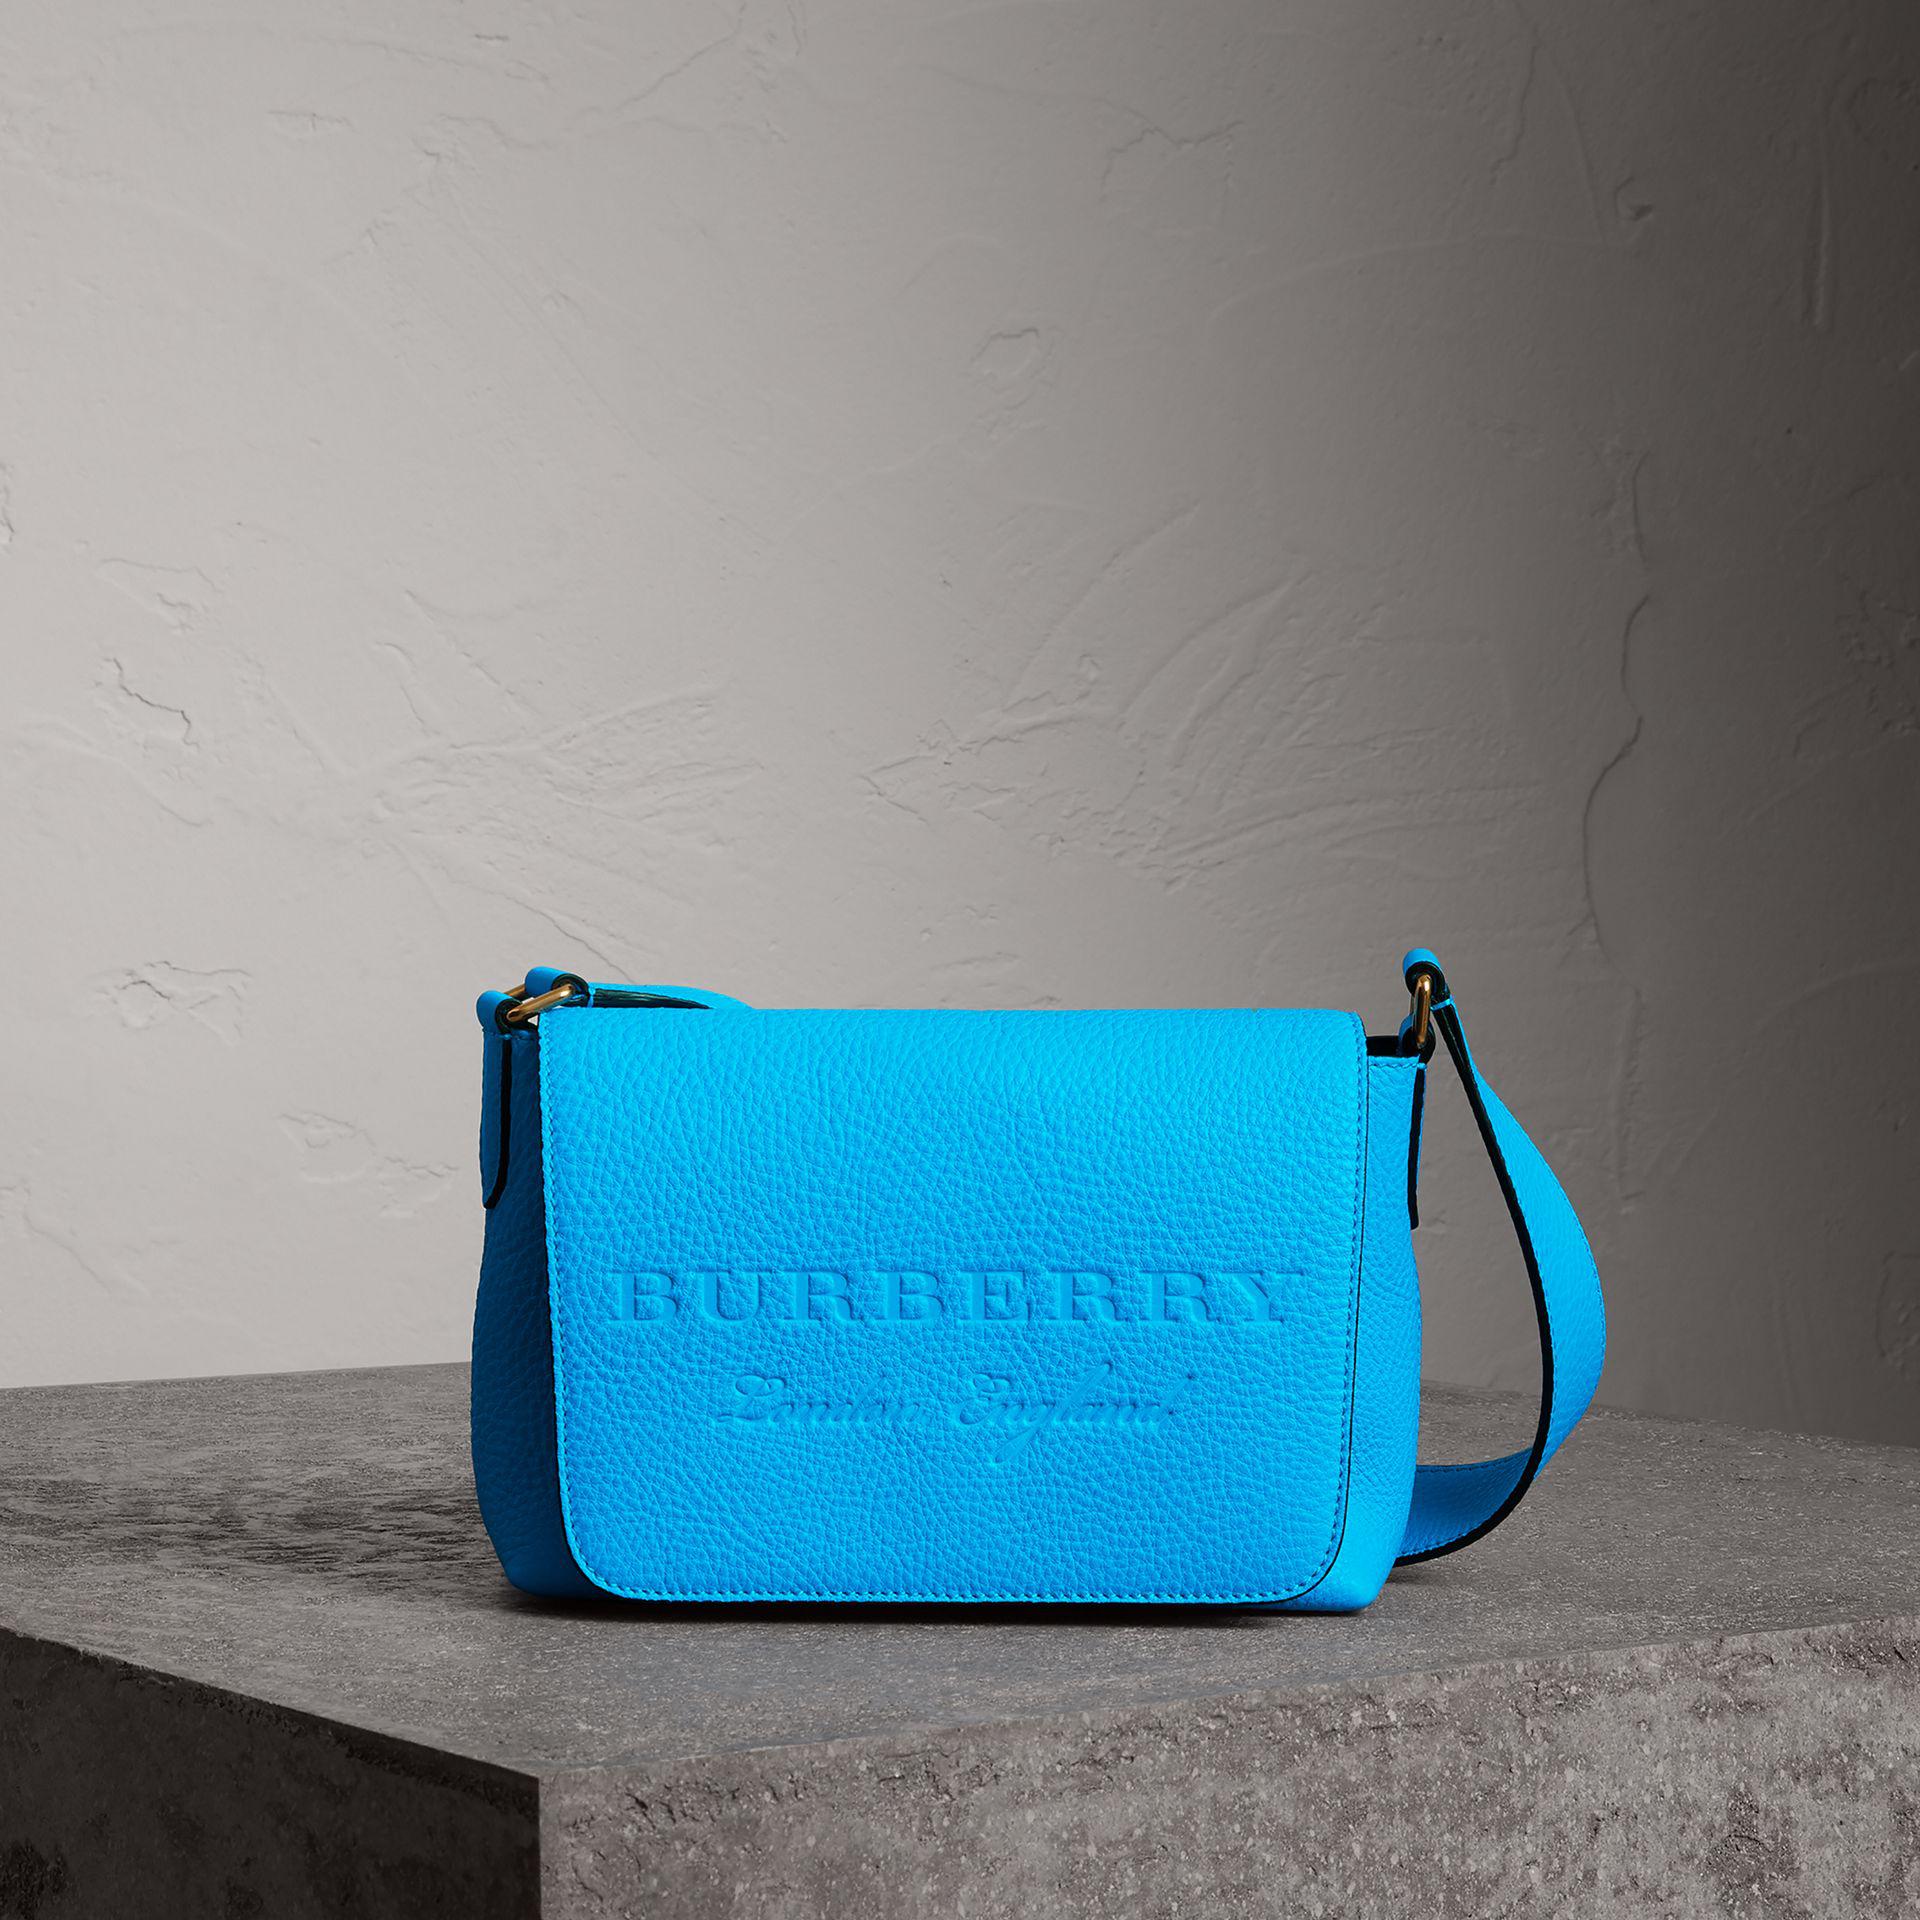 Burberry Small Embossed Neon Leather Messenger Bag in Blue | Lyst